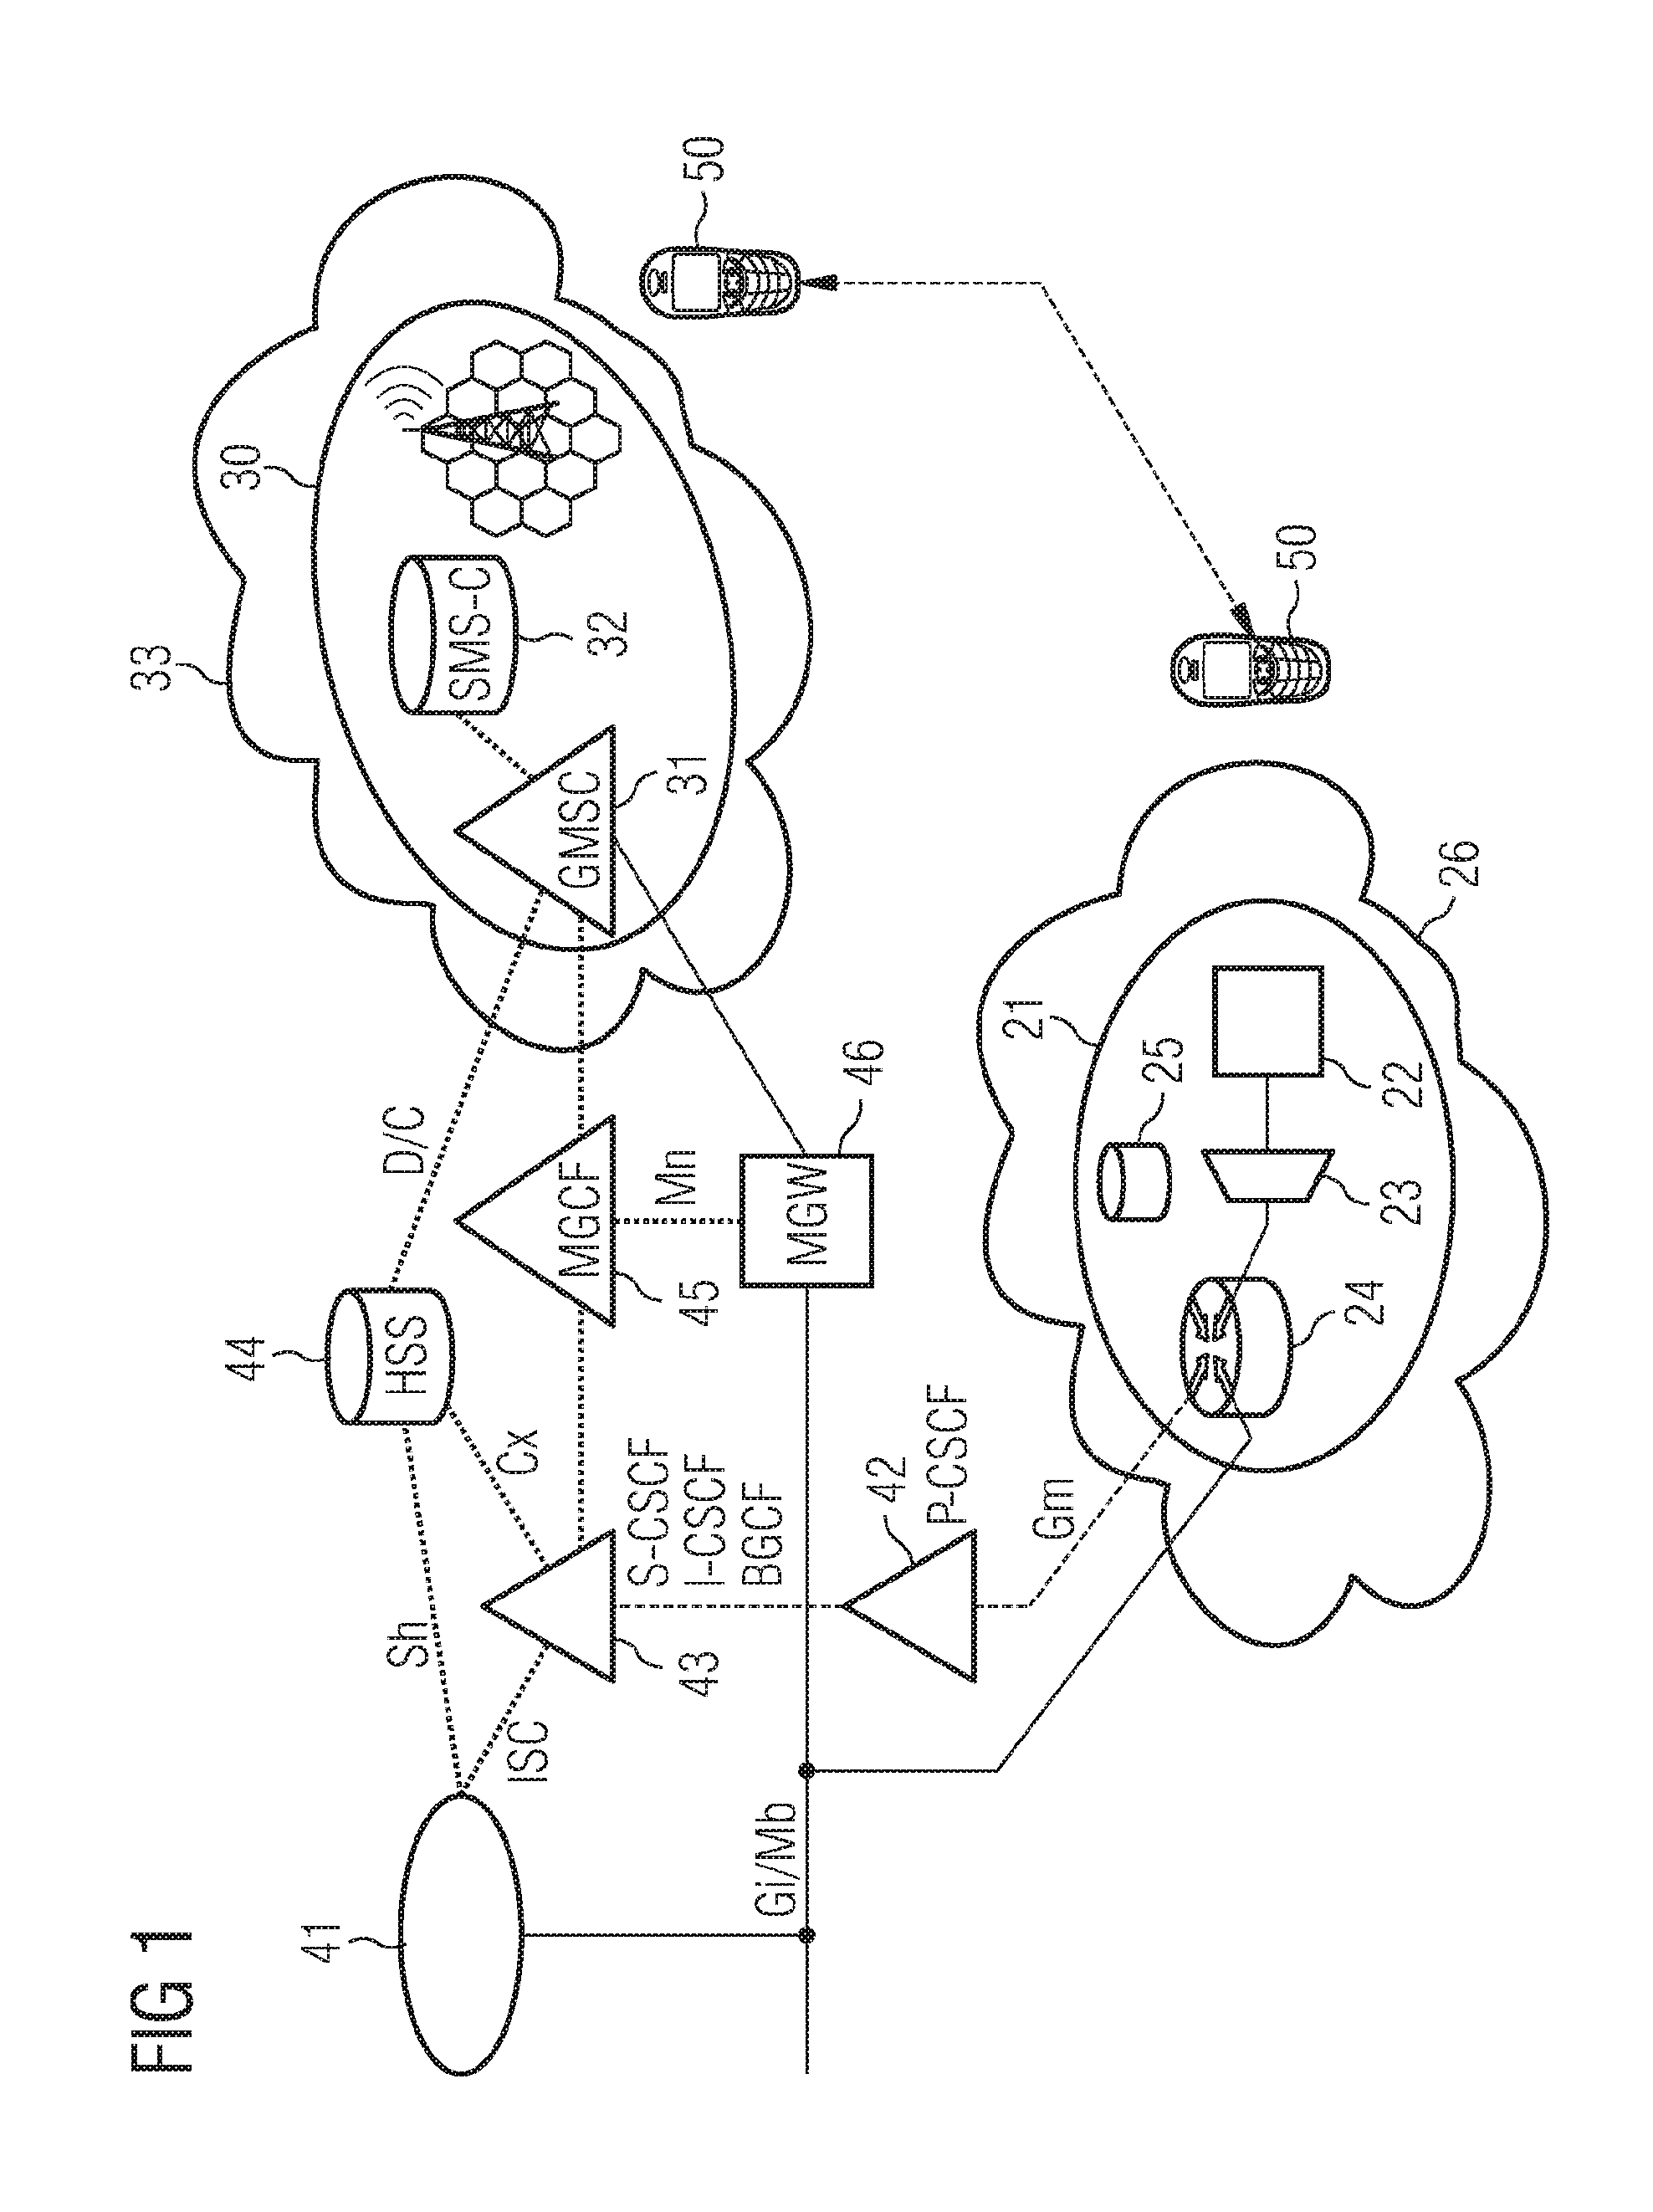 Method for providing subscriptions to packet-switched networks